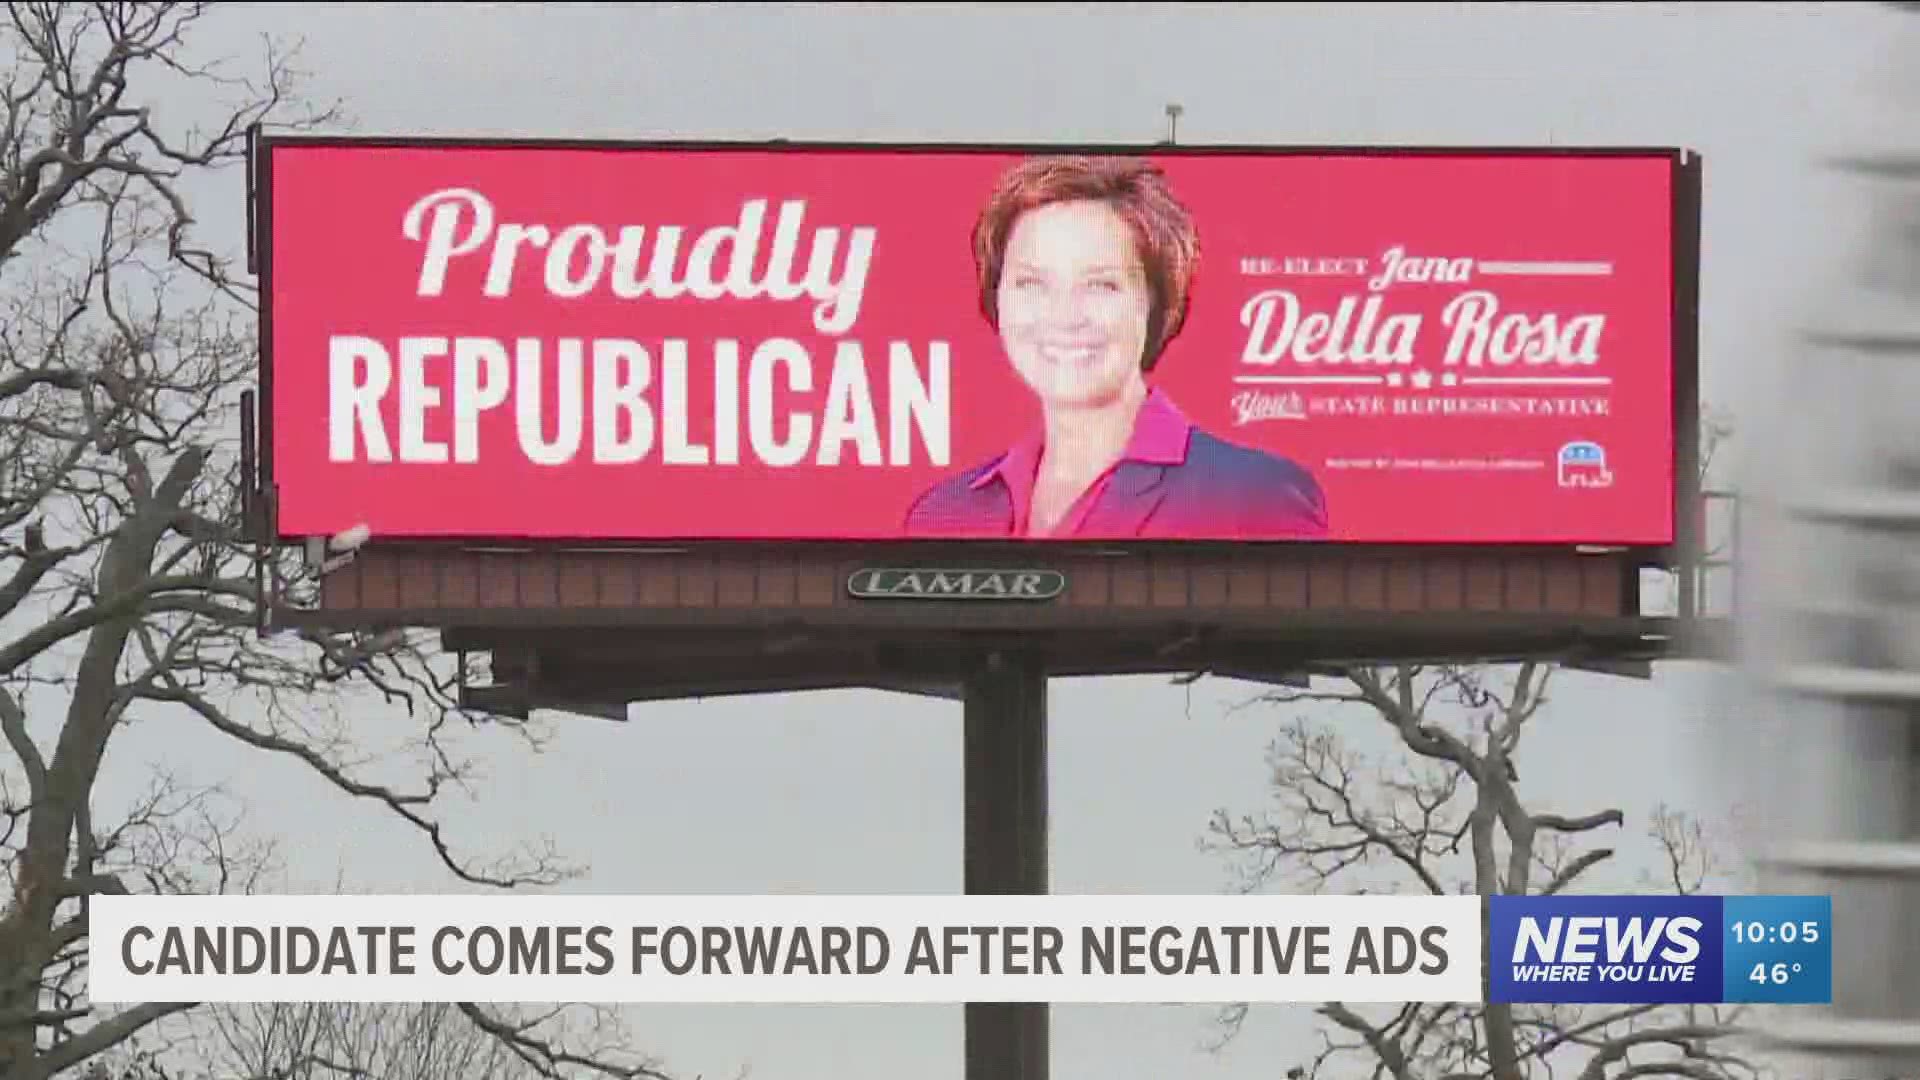 Candidate comes forward after negative ads